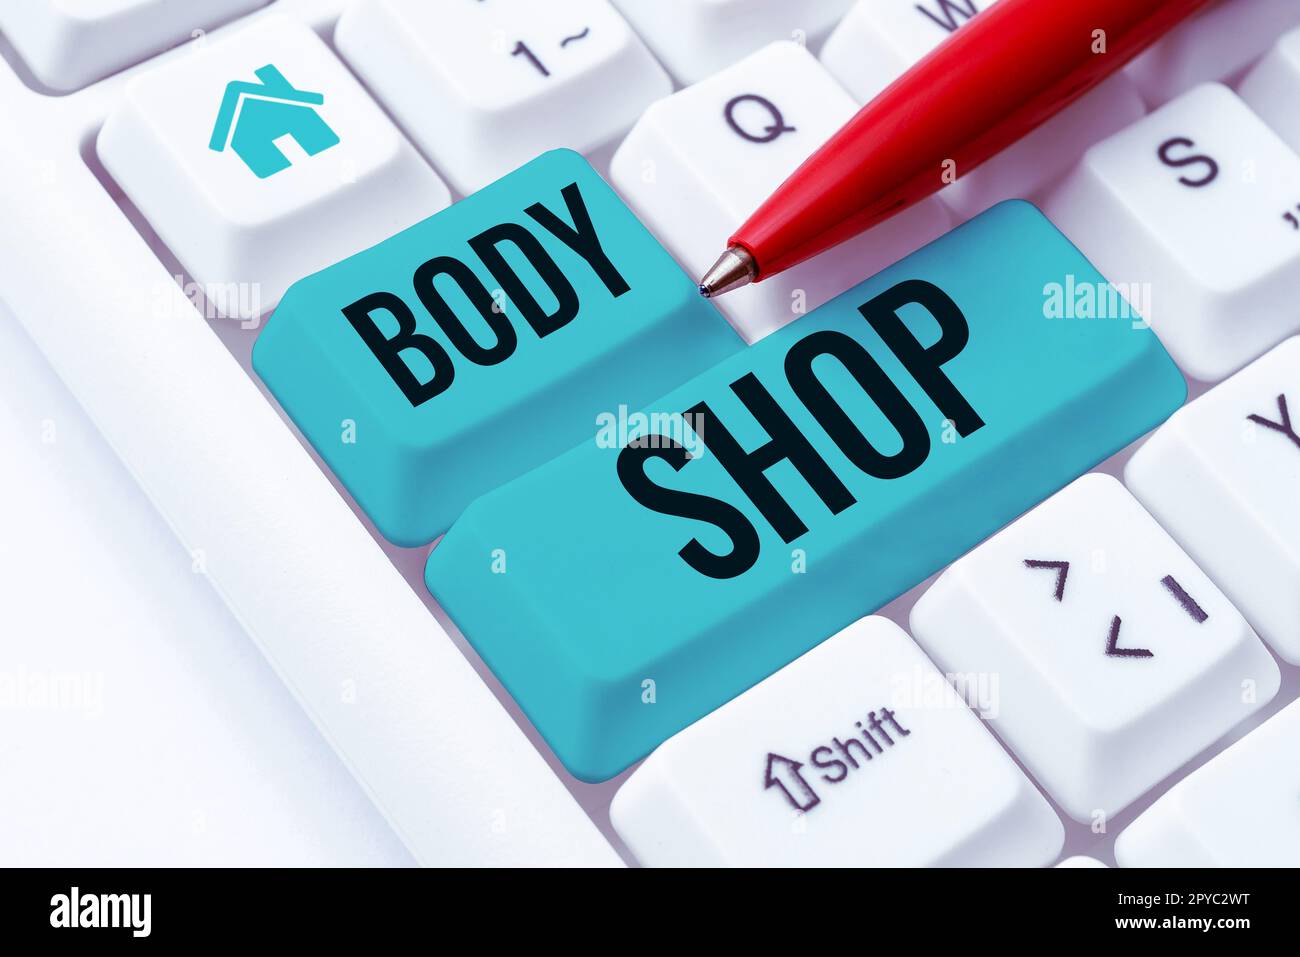 Handwriting text Body Shop. Business approach a shop where automotive bodies are made or repaired Stock Photo